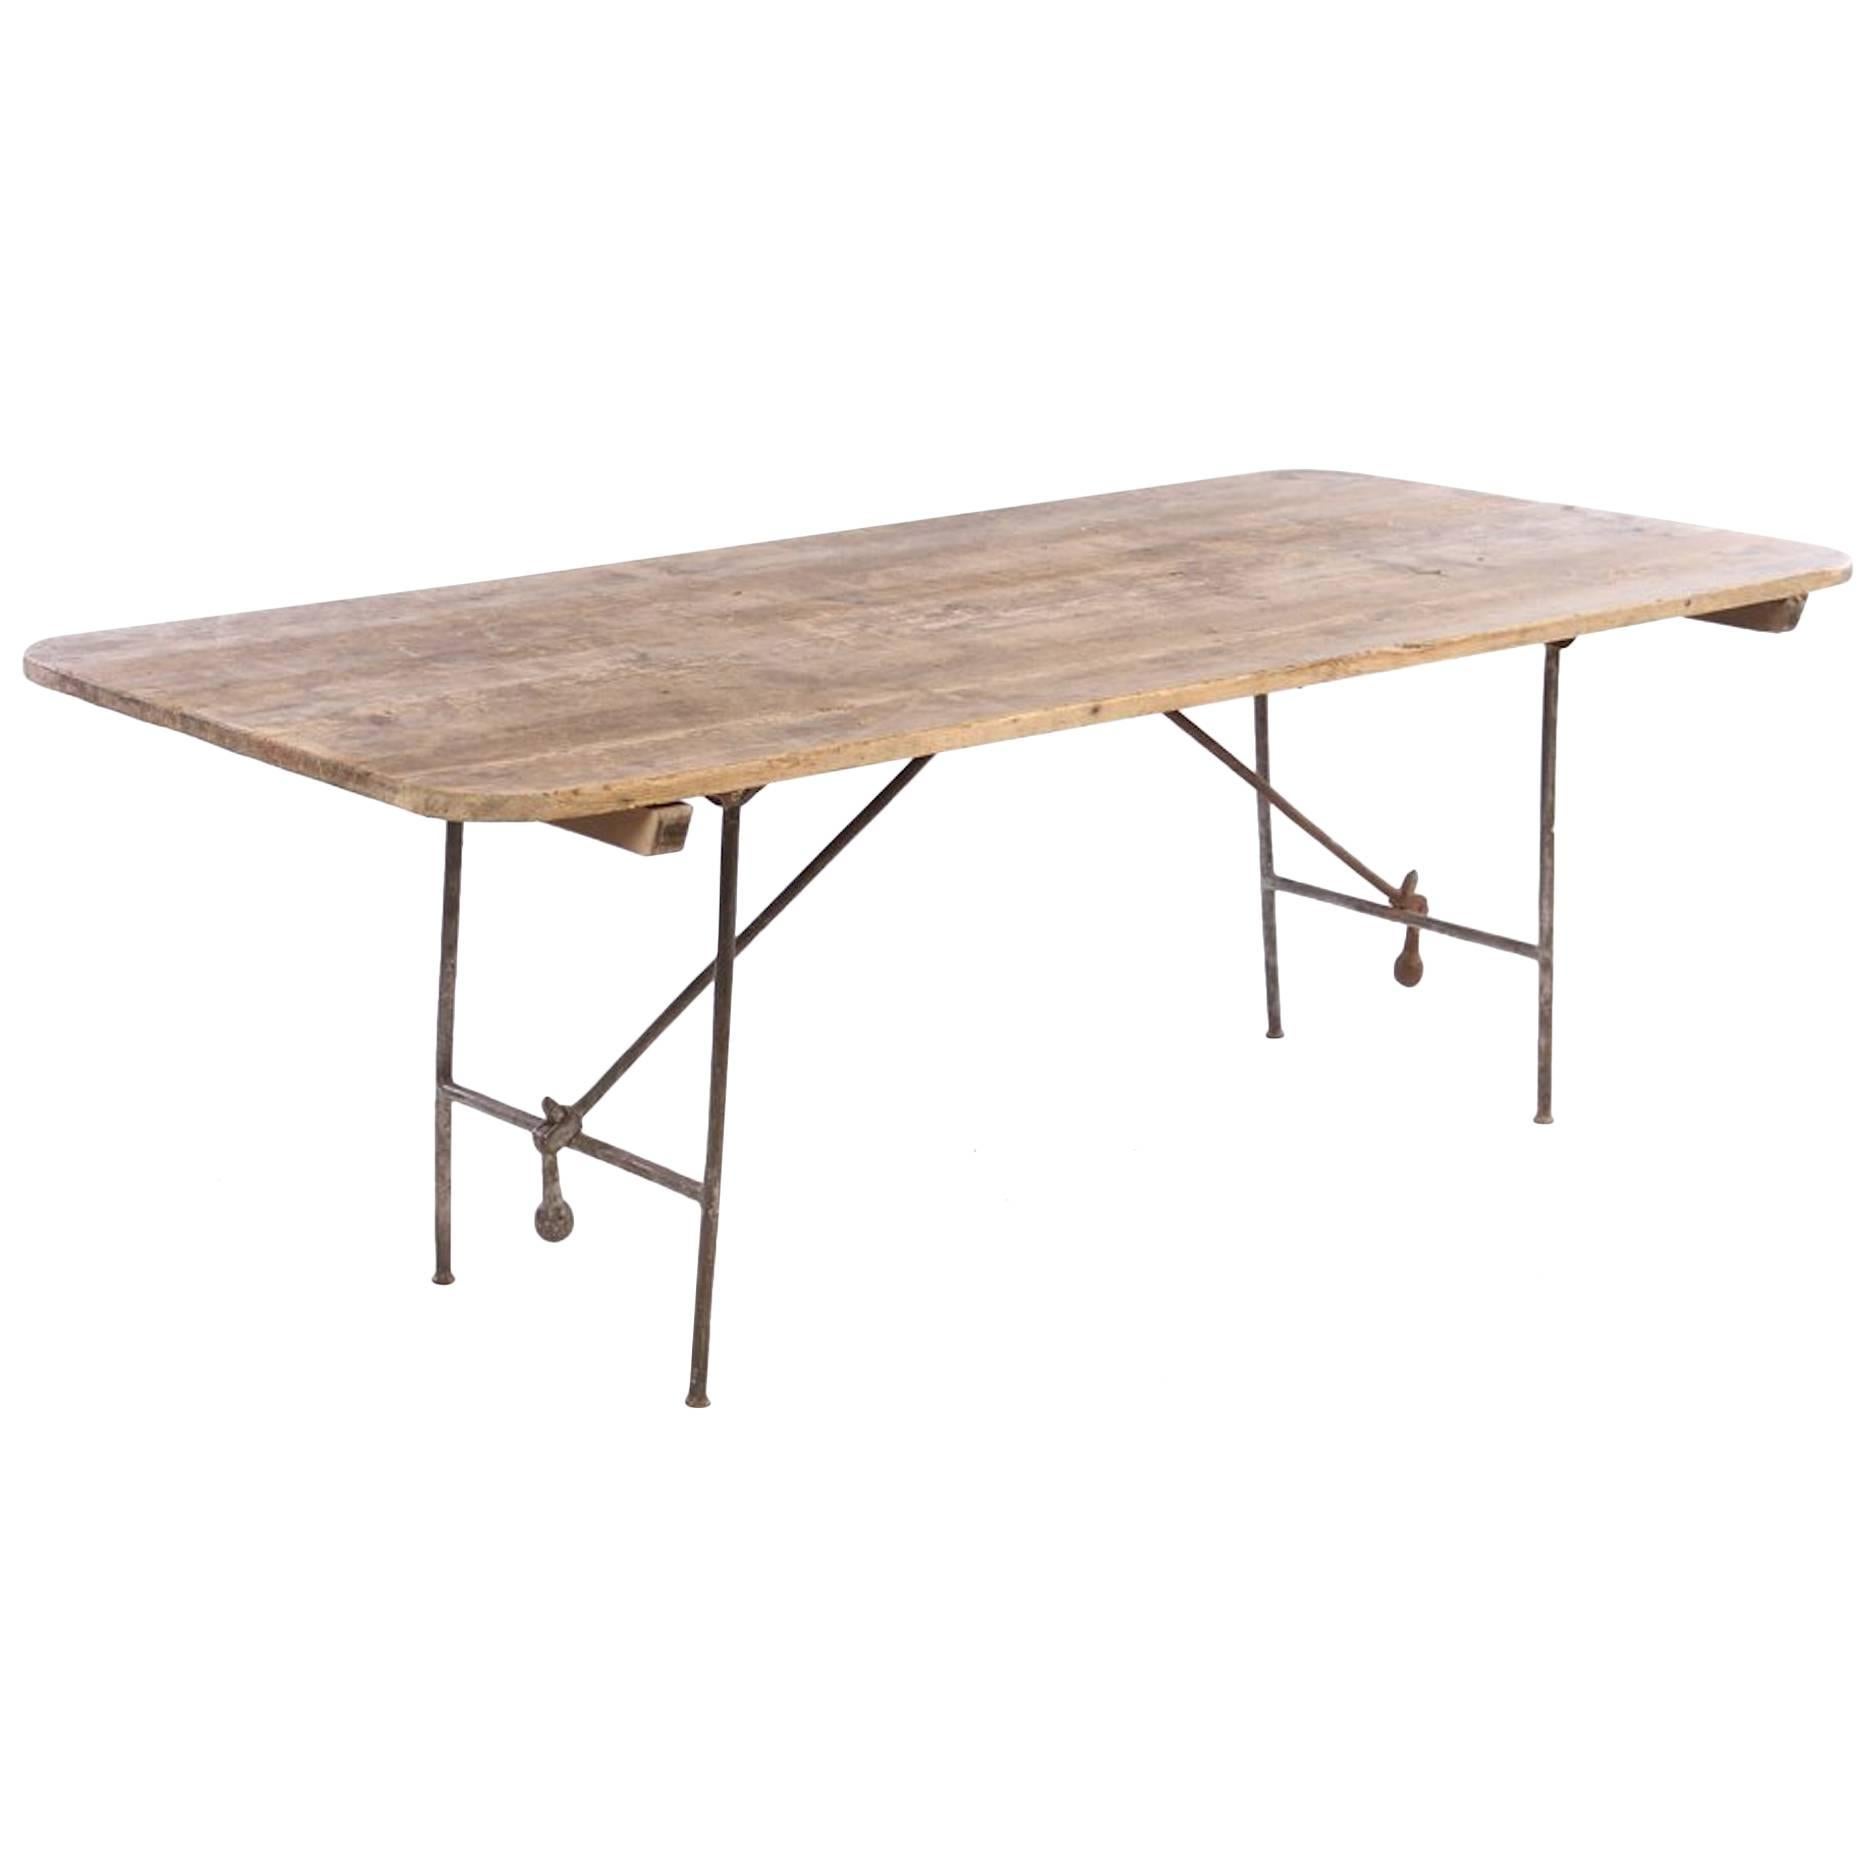 Early 20th Century Wood Plank Counterbalance Folding Table